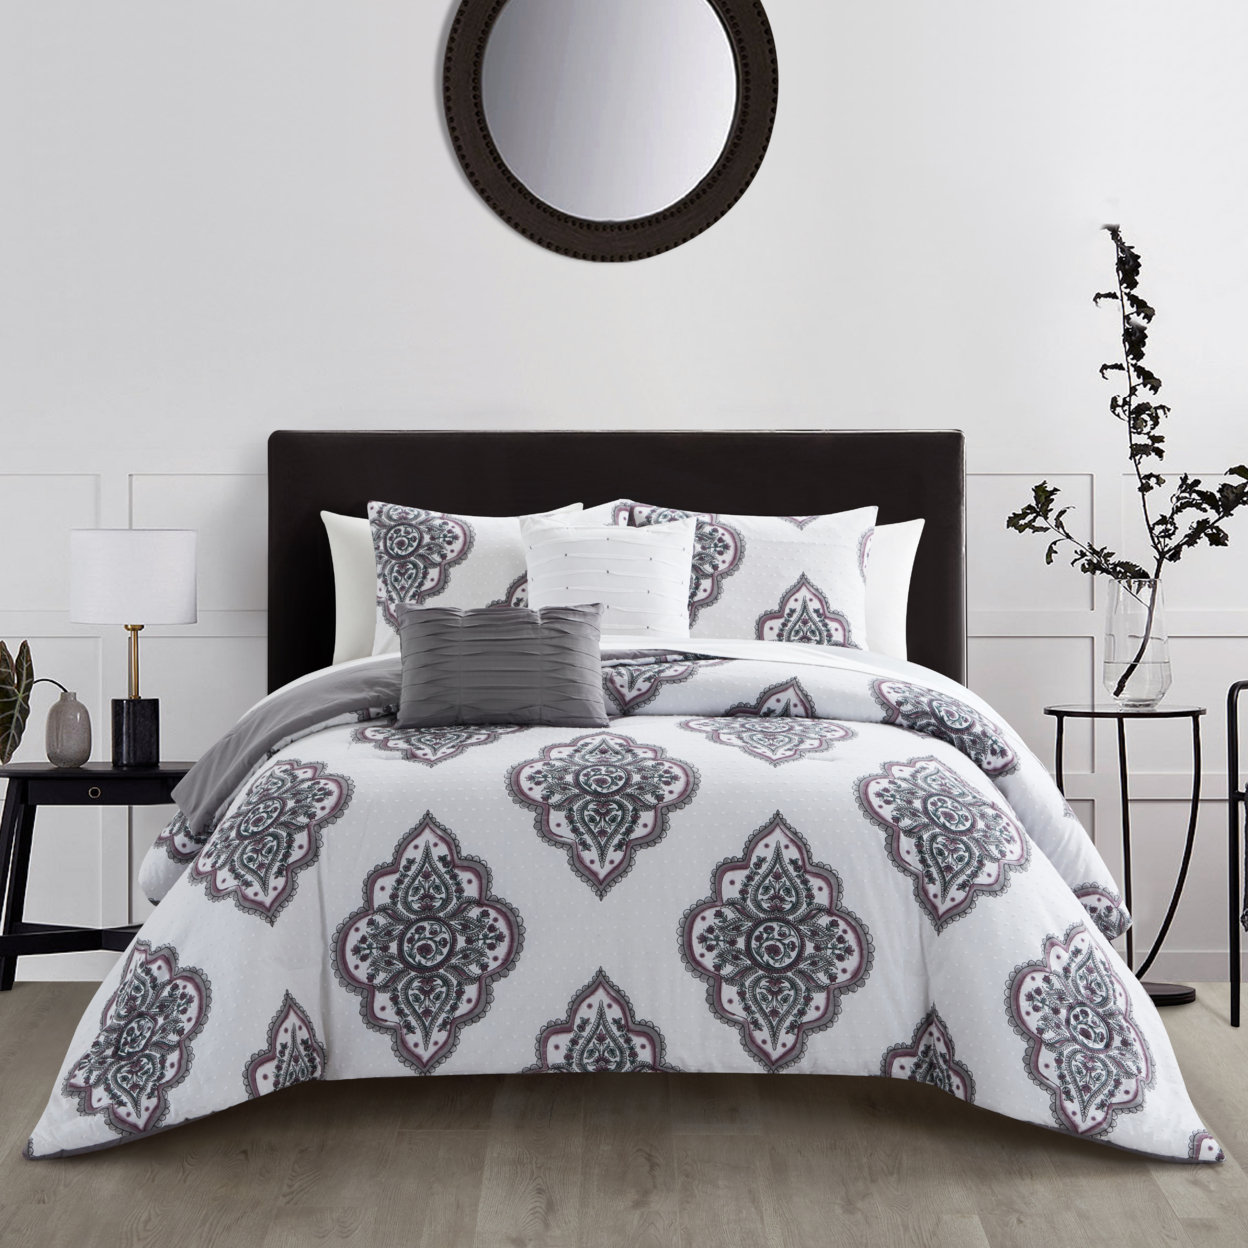 Paacey 5 or 9 Piece Cotton Jacquard Comforter Set Medallion Embroidered Bedding - grey, queen